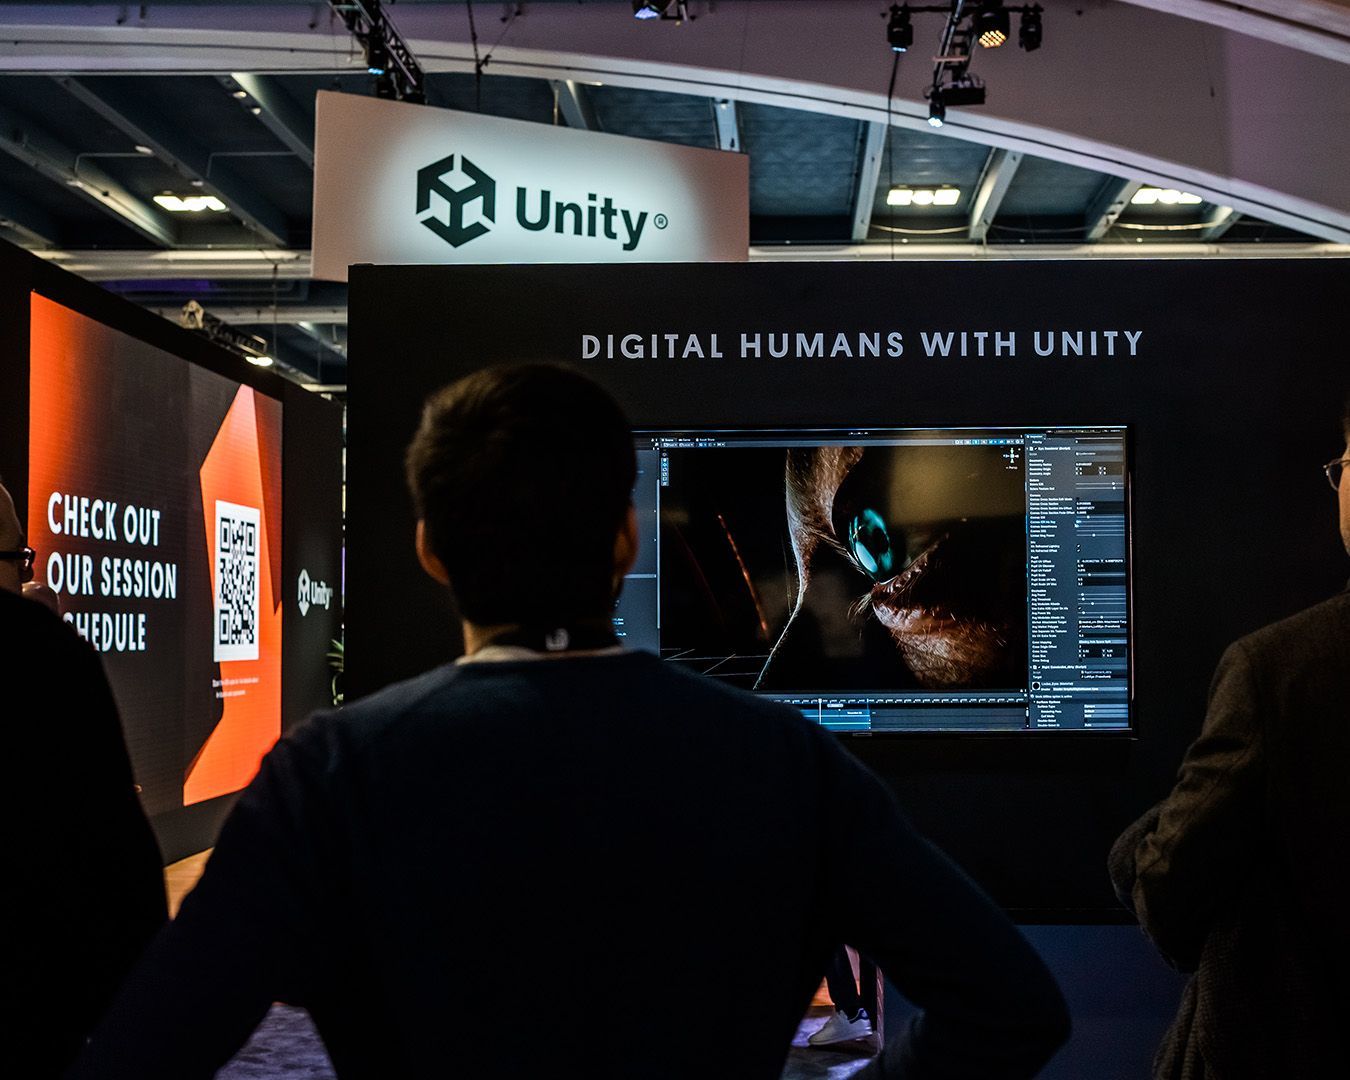 Want to ‘Do More with Unity’? We sure do! Our team landed at this week’s Game Developers Conference (GDC) in San Francisco. The ultimate event for the global game development community never disappoints and neither did this experience! A creator’s paradise, this comfortable and interactive environment featured all the latest tools – from digital humans to how to create immersive characters and environments. Visitors got hands-on demonstrations from Unity experts and creators and the enthusiasm was contagious! 